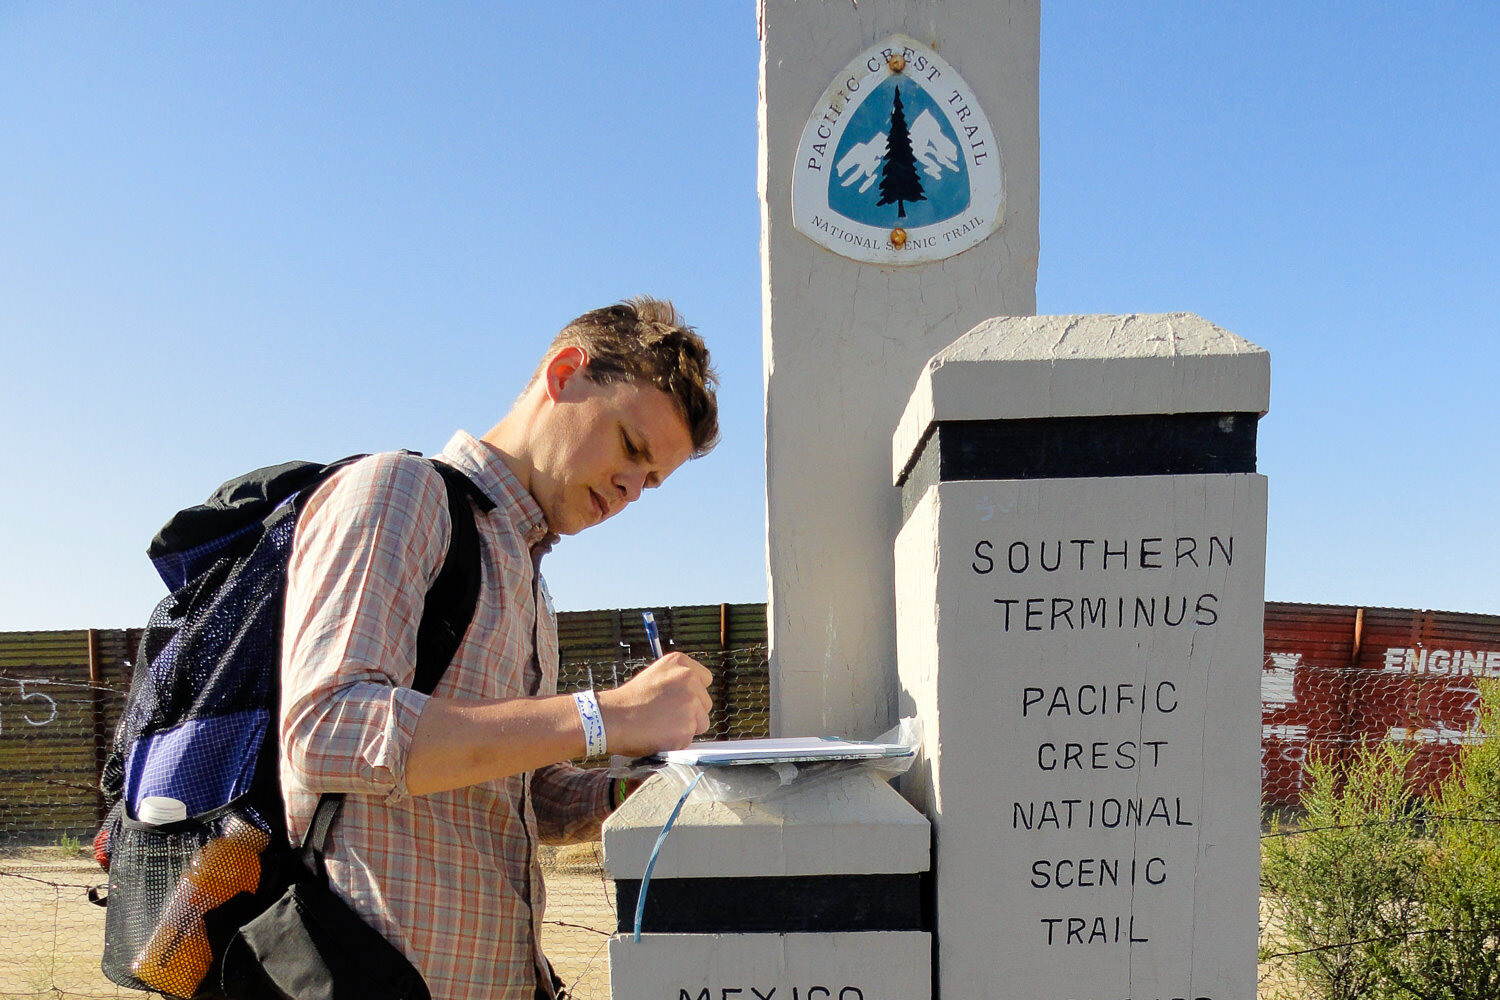 A Thru-Hiker writes in the log book at the Southern Terminus Near Campo, CALifornia